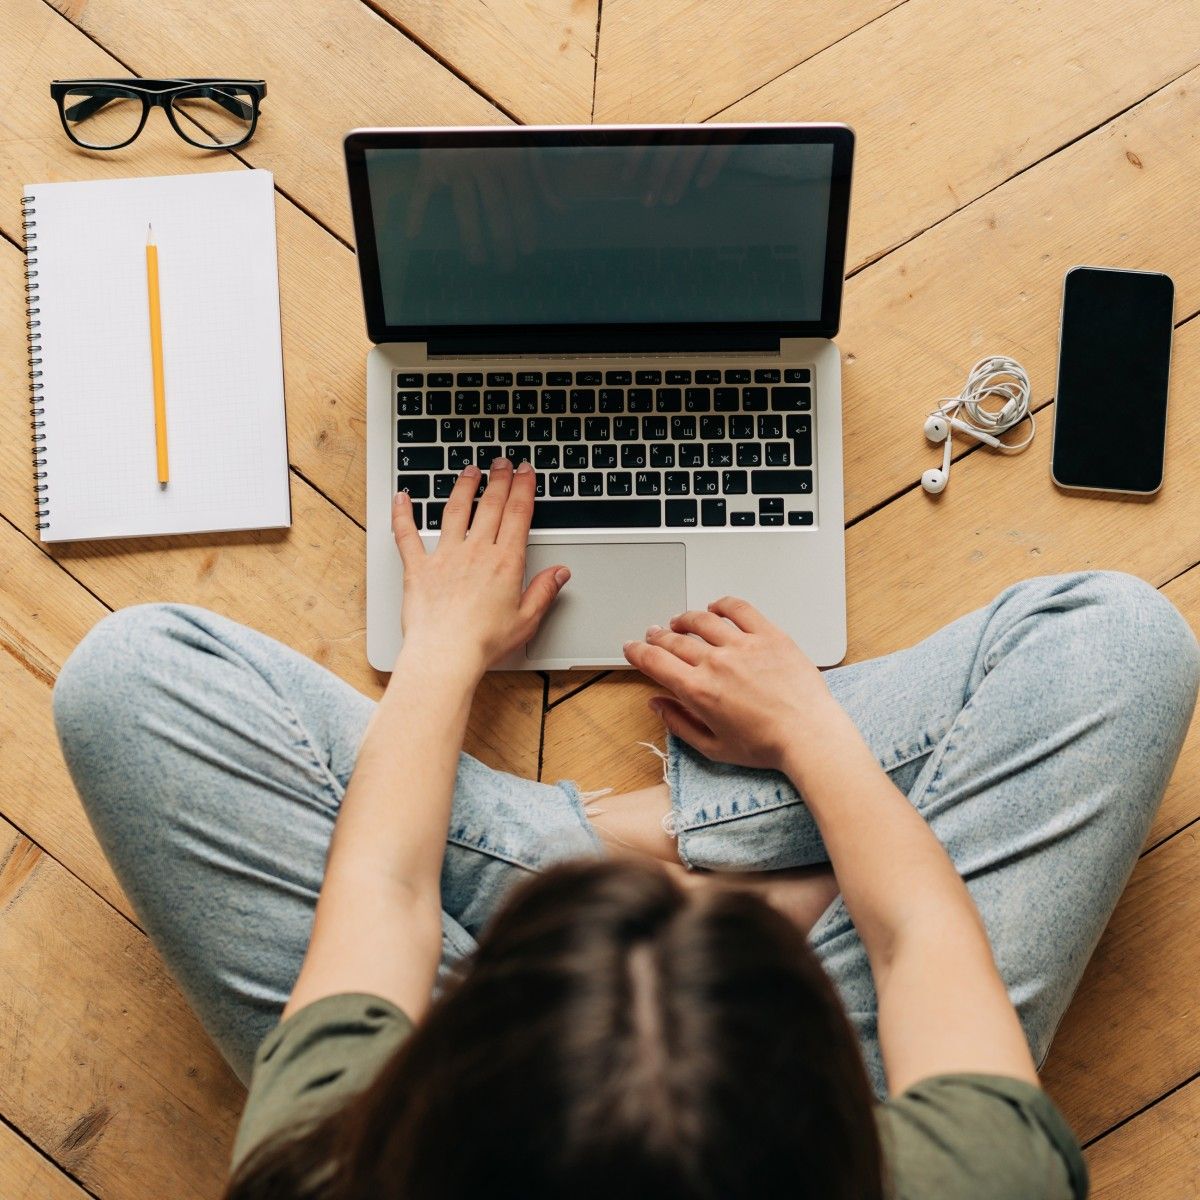 A top-down view of a dark-haired woman wearing jeans and green shirt typing on her Macbook laptop. She&#x27;s sitting on a wooden floor and her cell phone, earbuds, and a notebook and pencil are surrounding her.